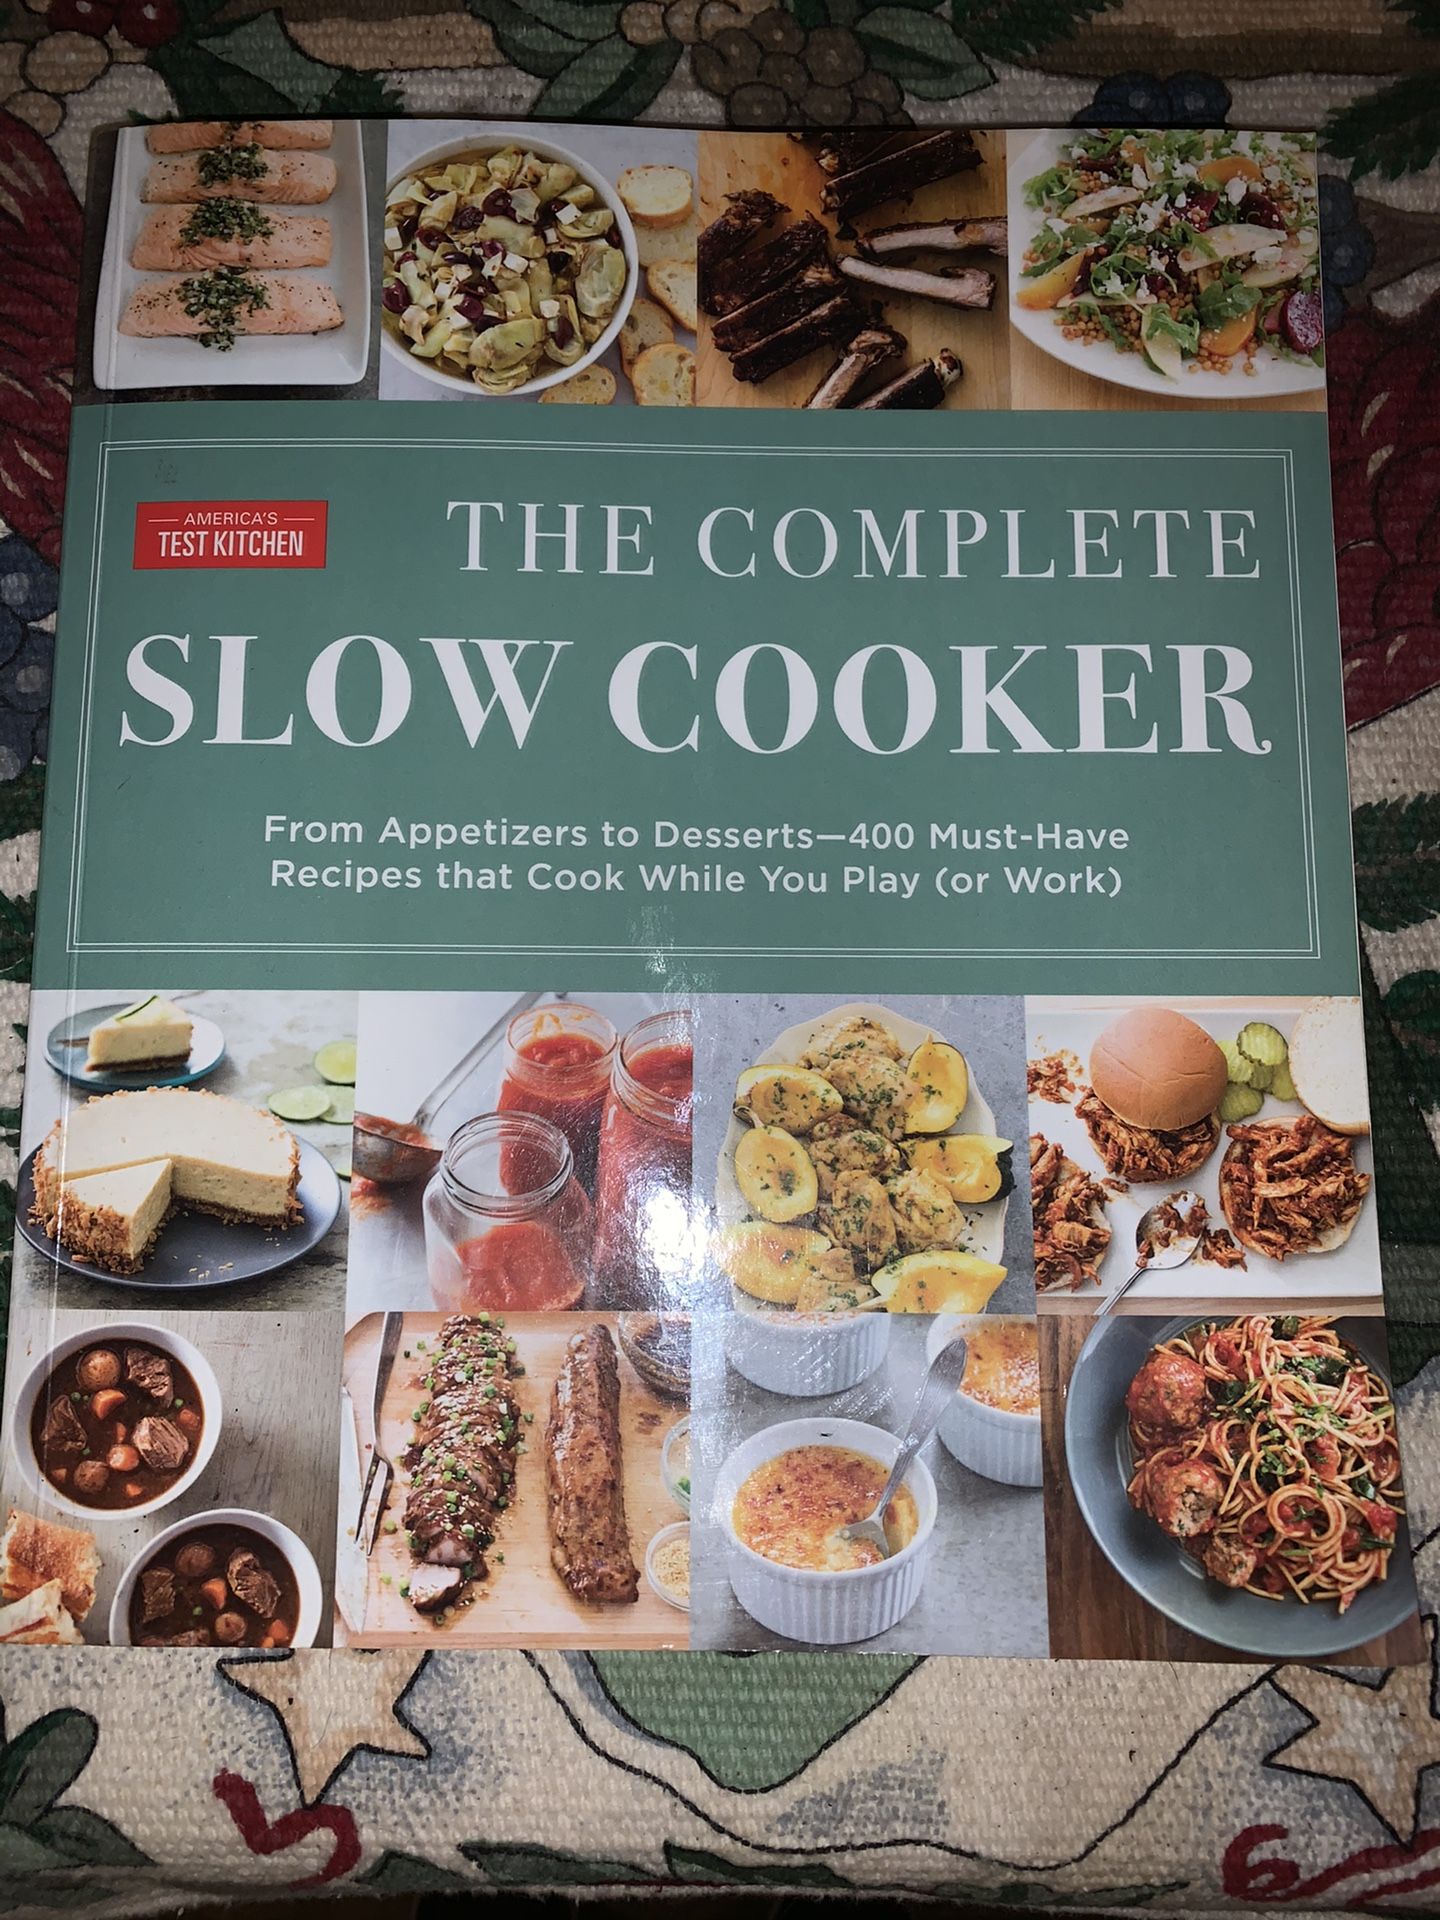 Slow cooker cook book New